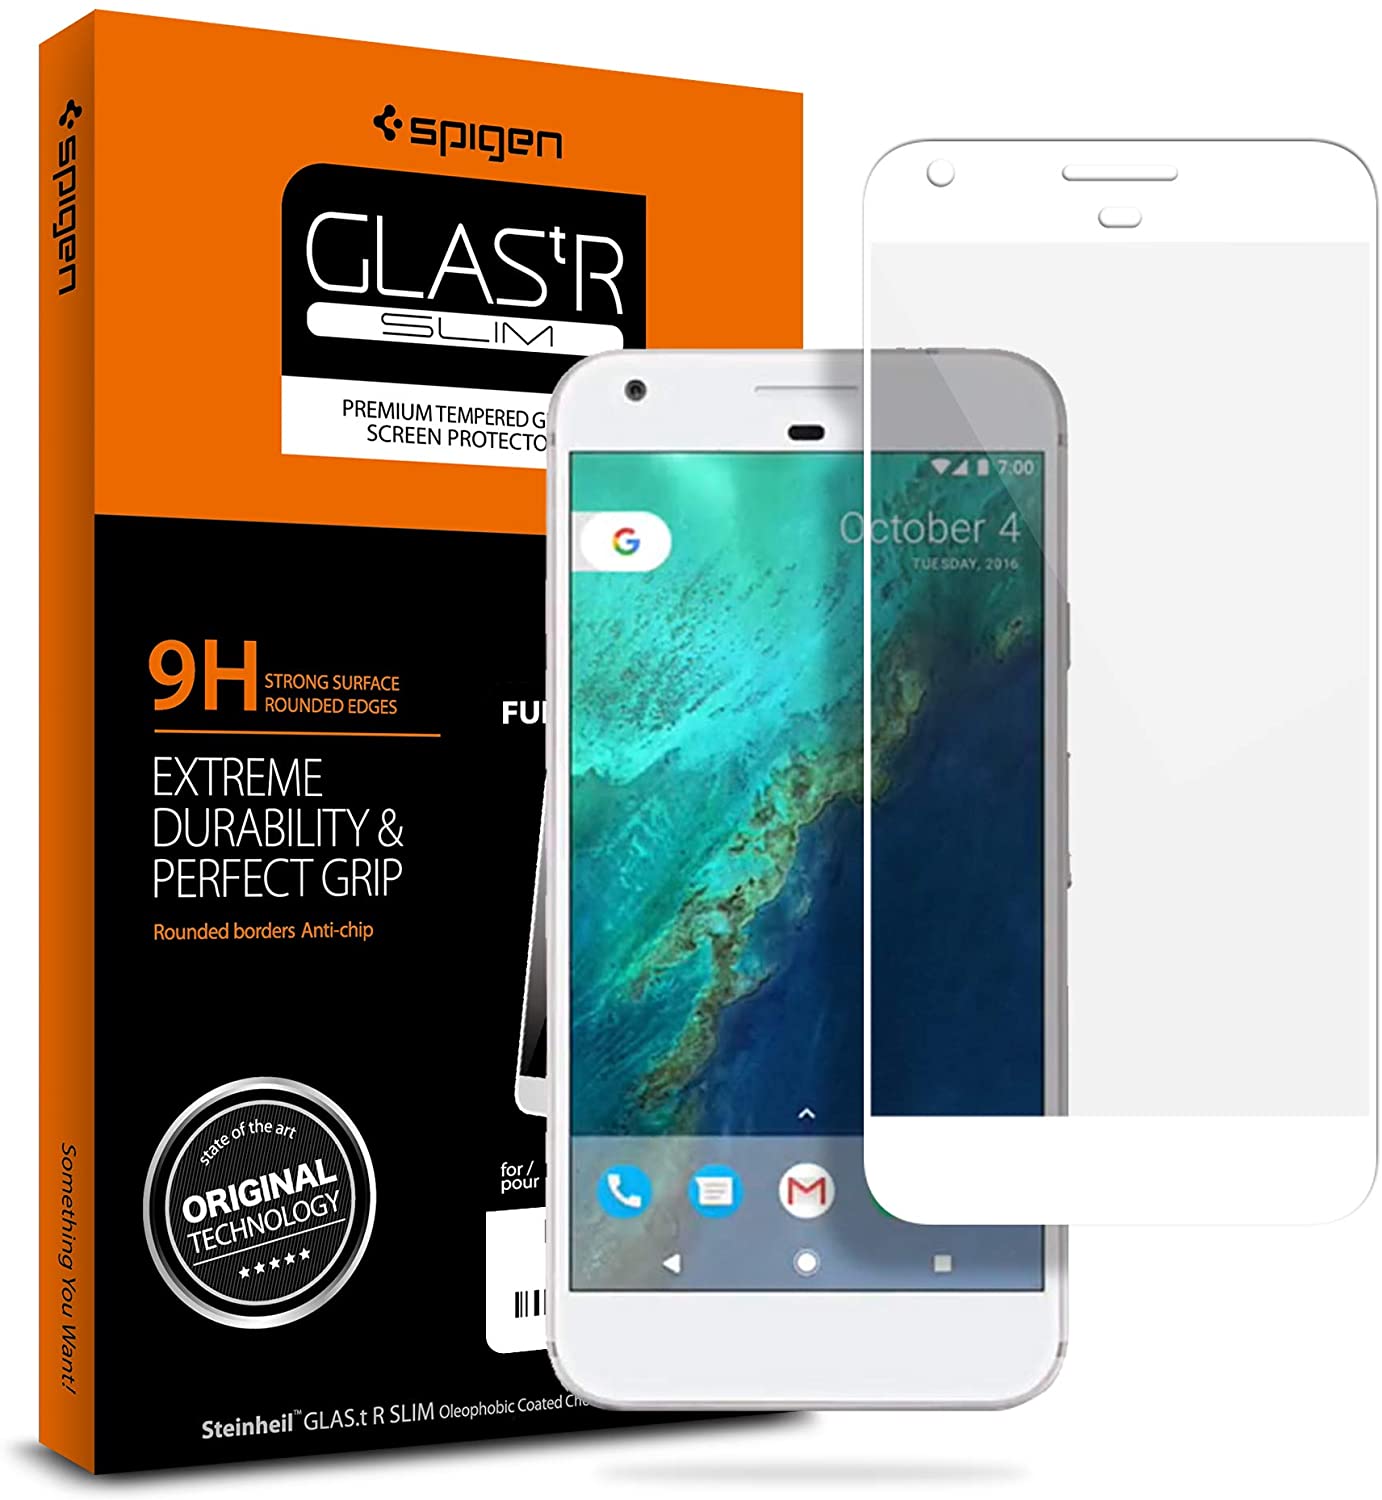 Spigen Tempered Glass Google Pixel Screen Protector [ Case Friendly ] [ Maximum Protection ] for Google Pixel (2016 Release) - White - e4cents